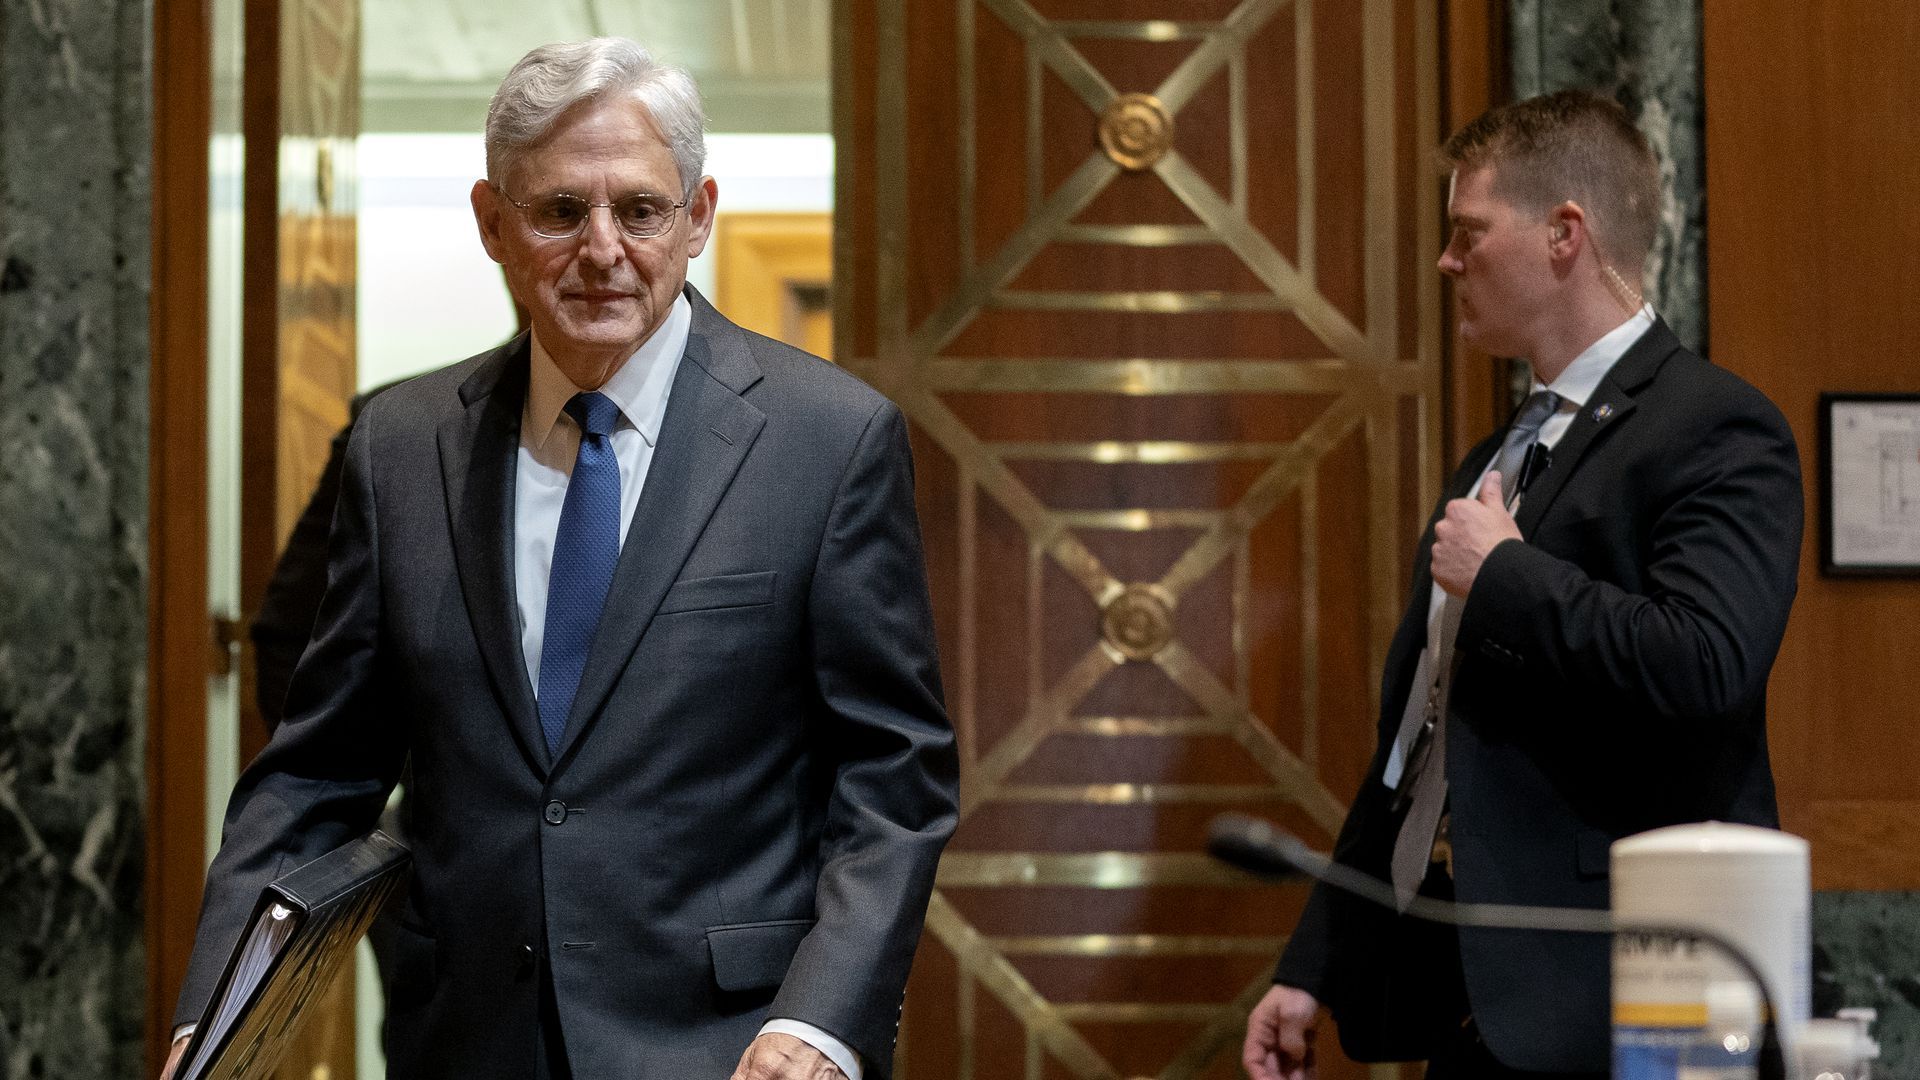 Picture of Merrick Garland holding a binder and walking